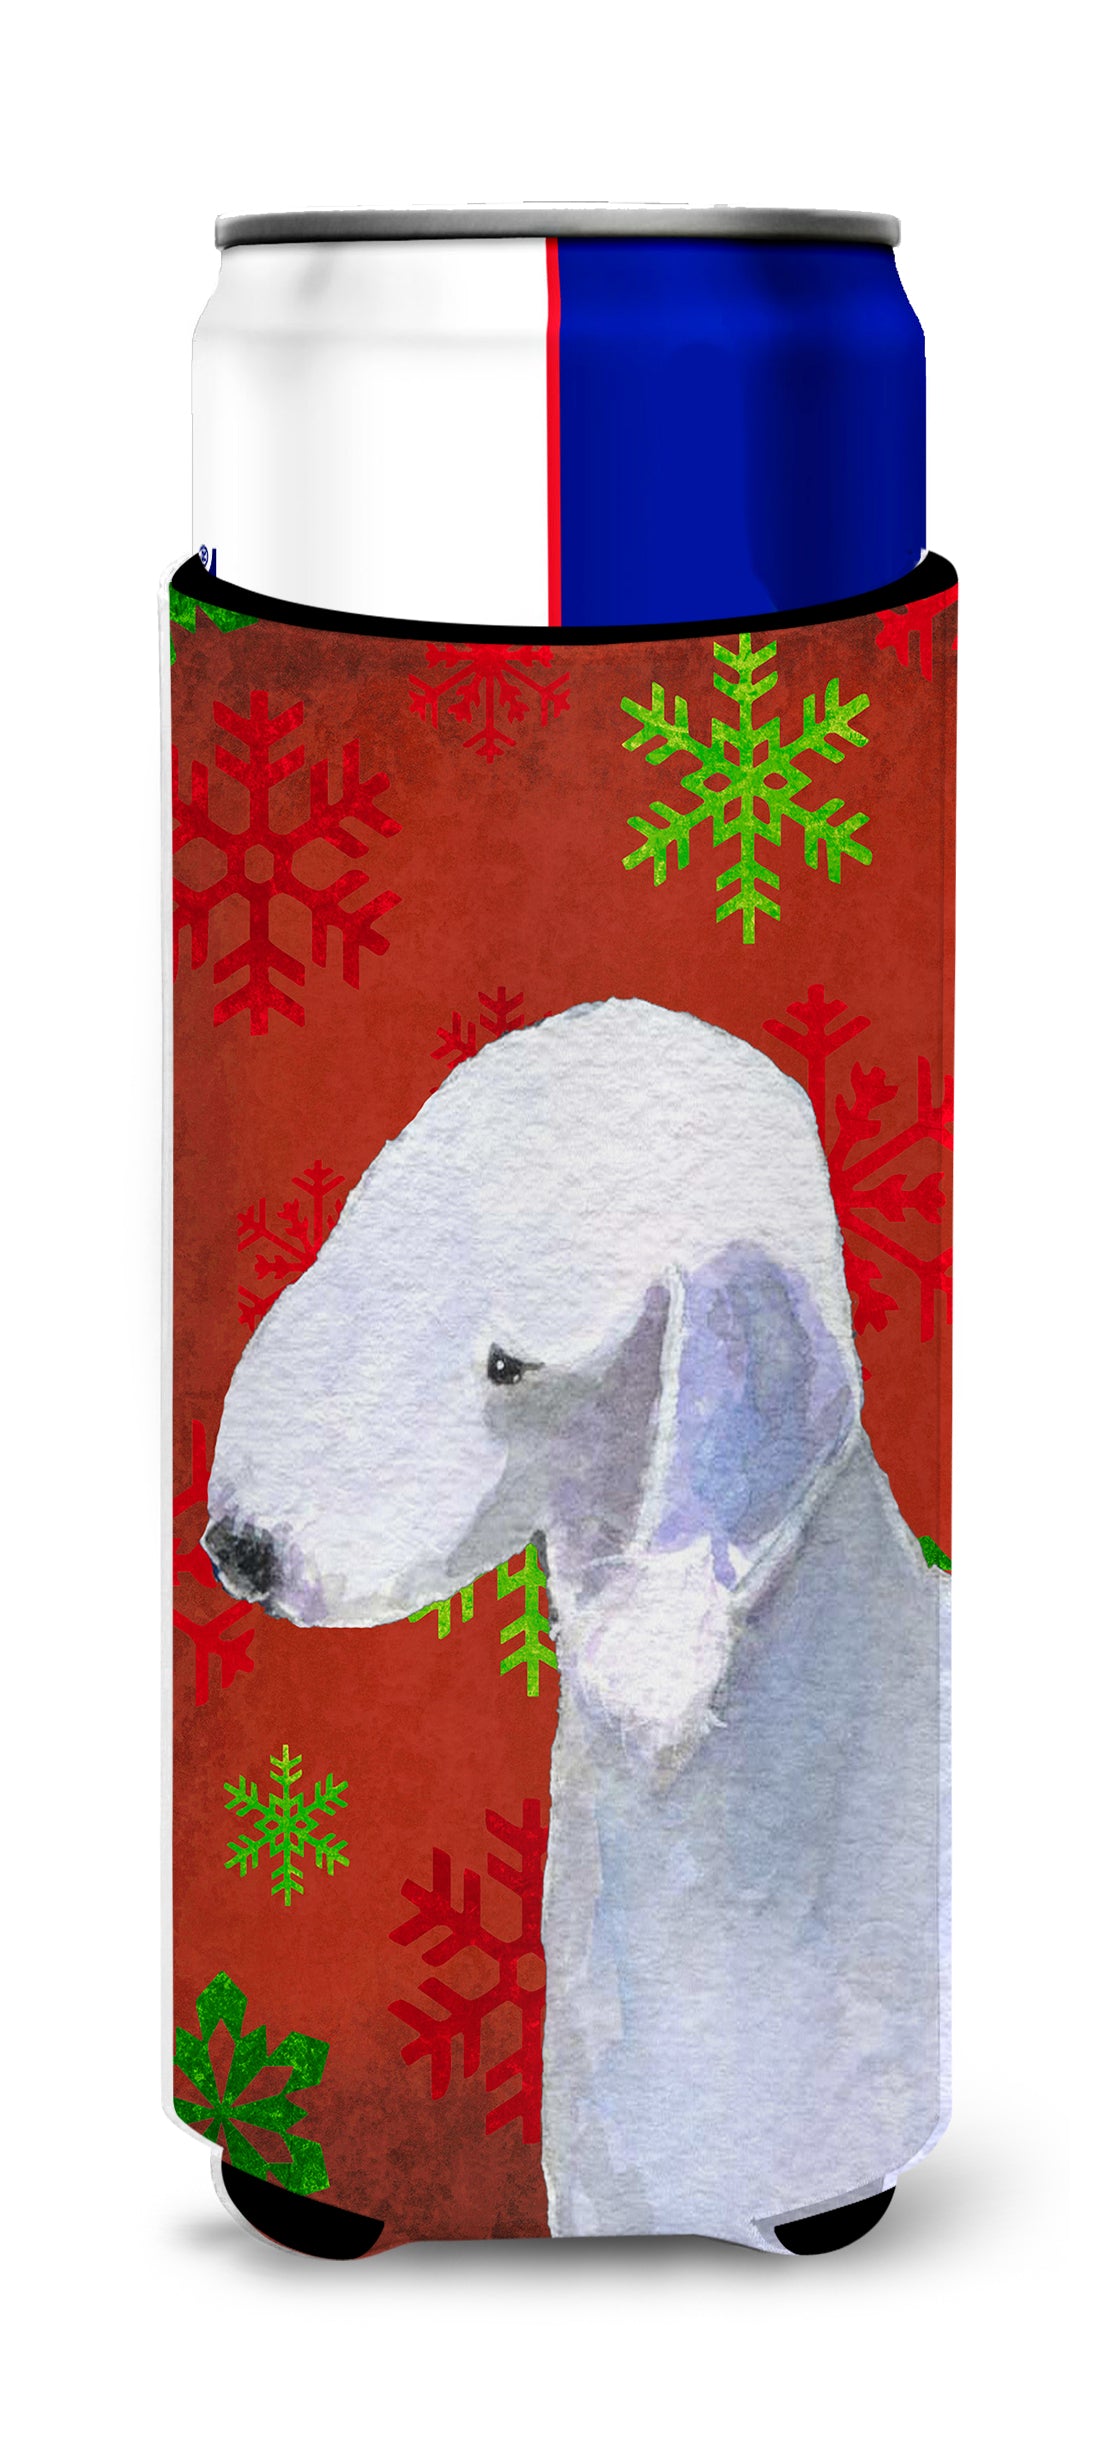 Bedlington Terrier Red and Green Snowflakes Holiday Christmas Ultra Beverage Insulators for slim cans SS4690MUK.